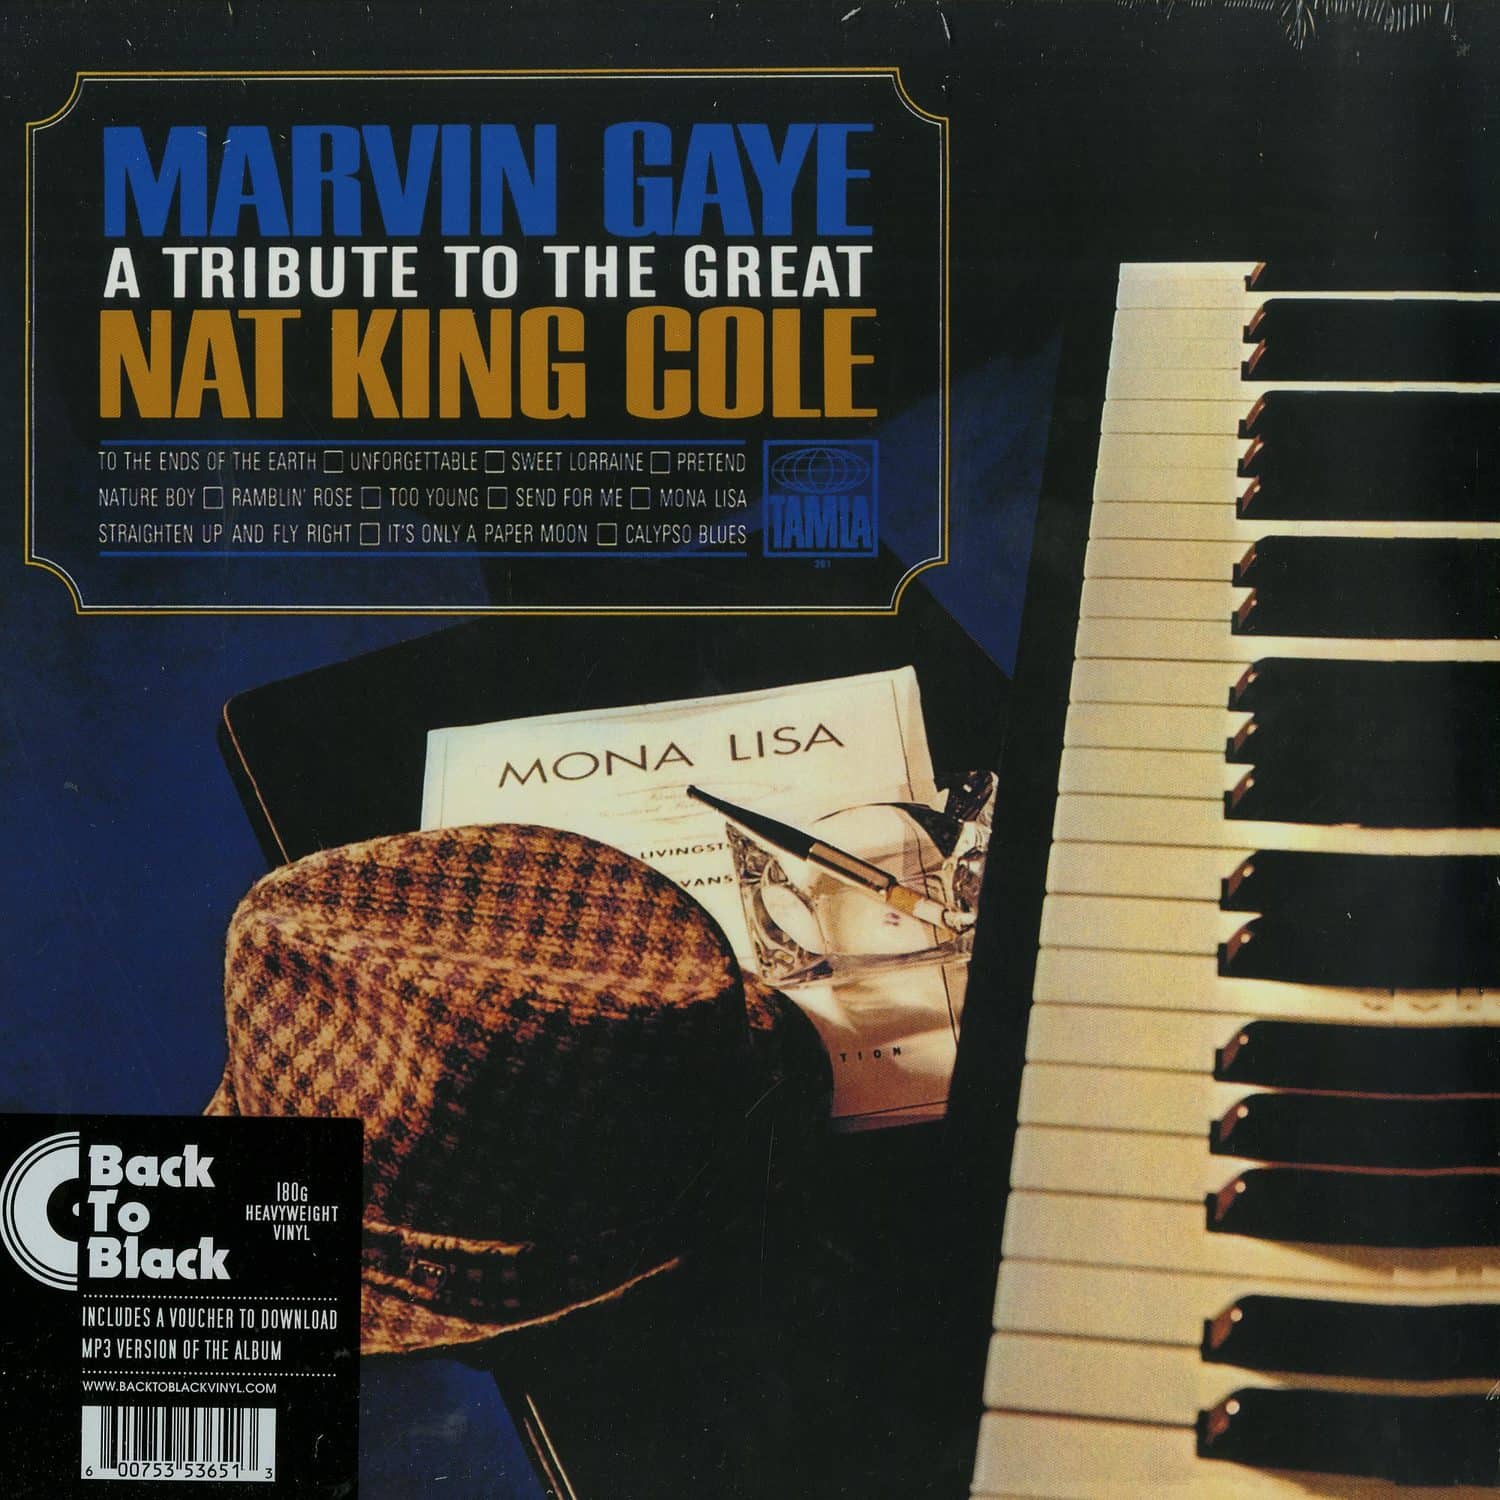 Marvin Gaye - A TRIBUTE TO THE GREAT NAT KING COLE 